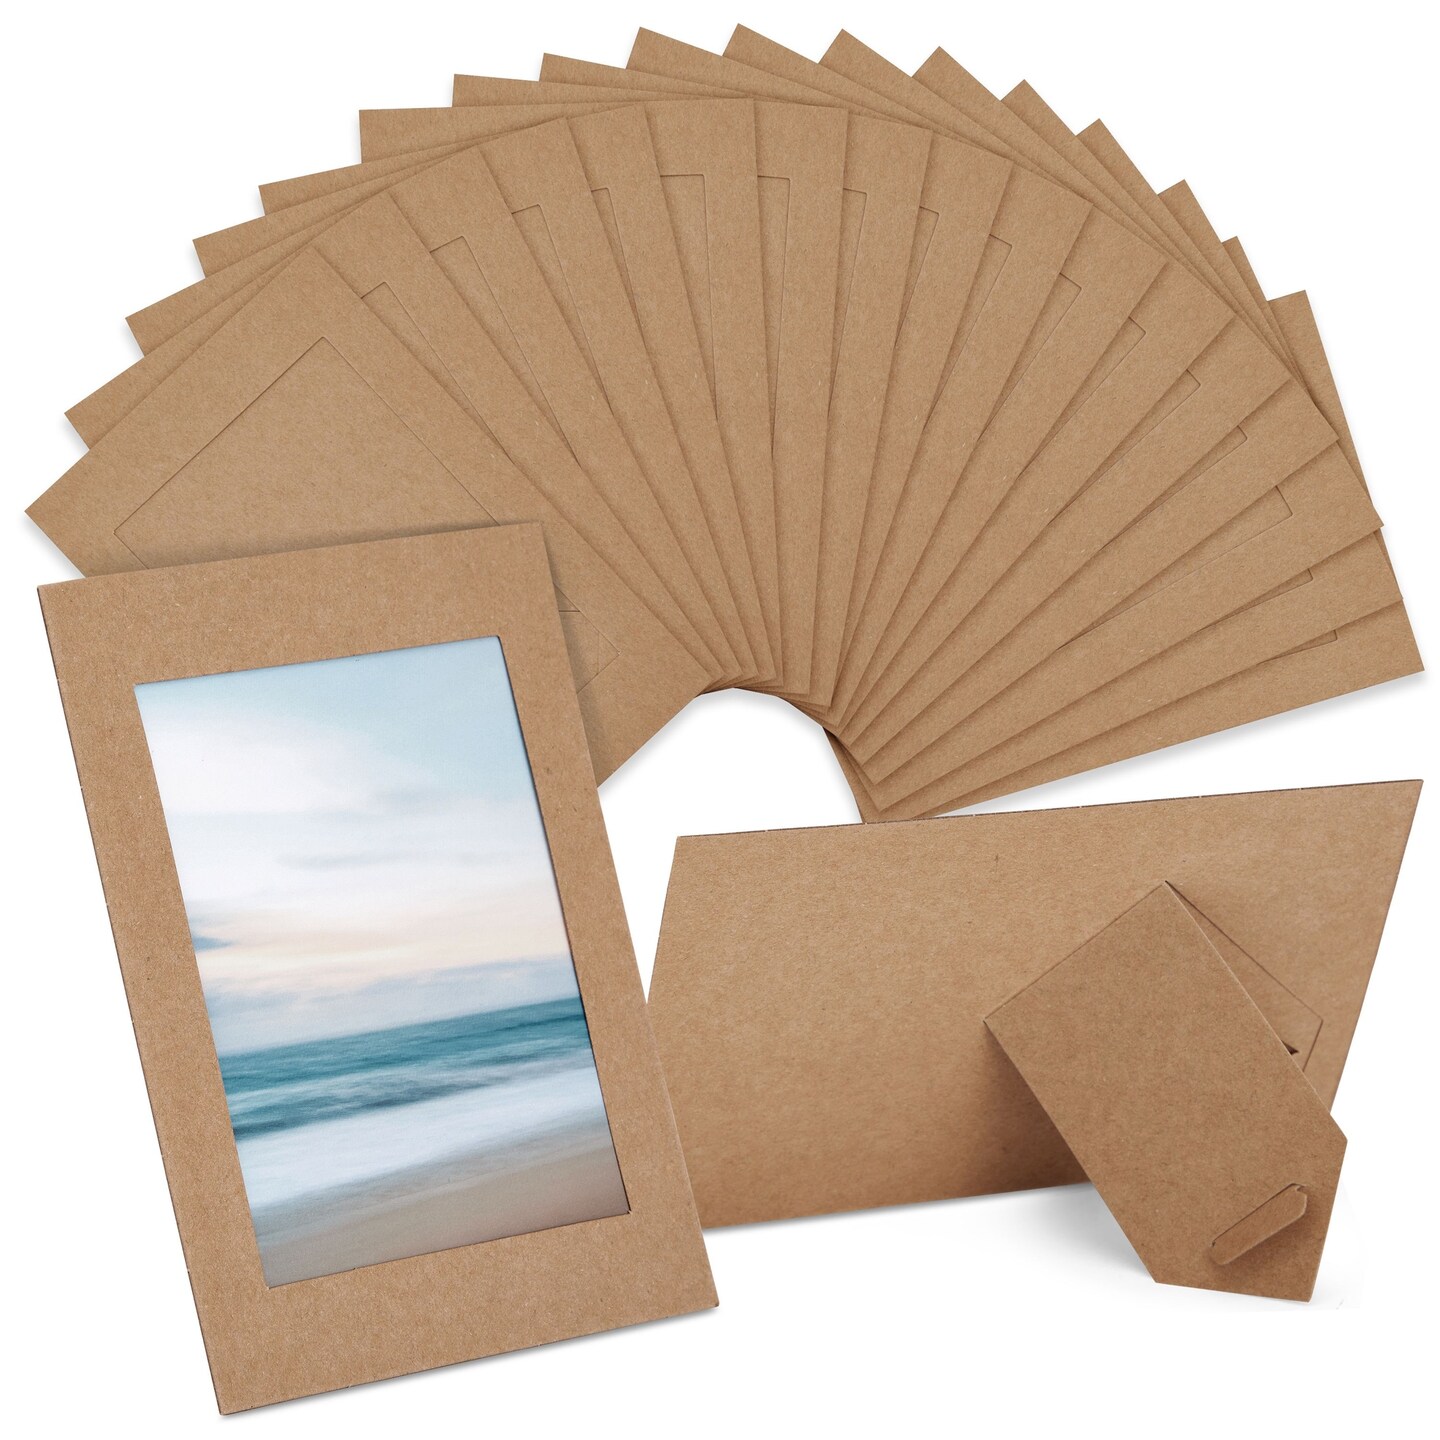 Juvale Cardboard Photo Picture Frame Easel (50 Pack) 4 x 6 Inches, Black